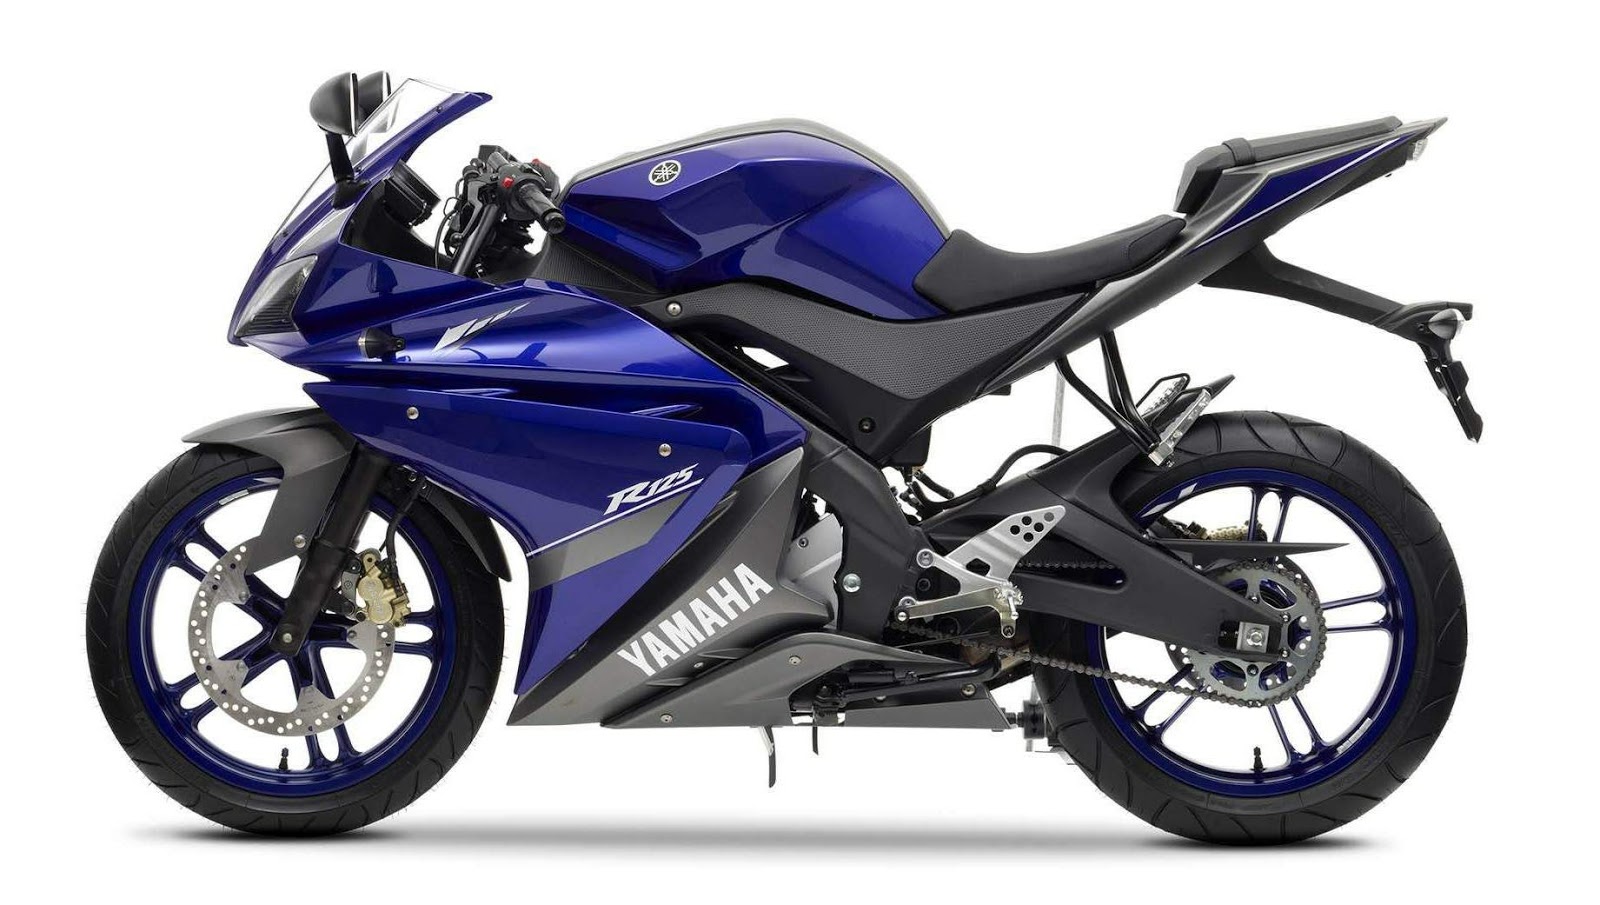 Yamaha Yzf R125 HD Wallpaper Pictures Gallery All